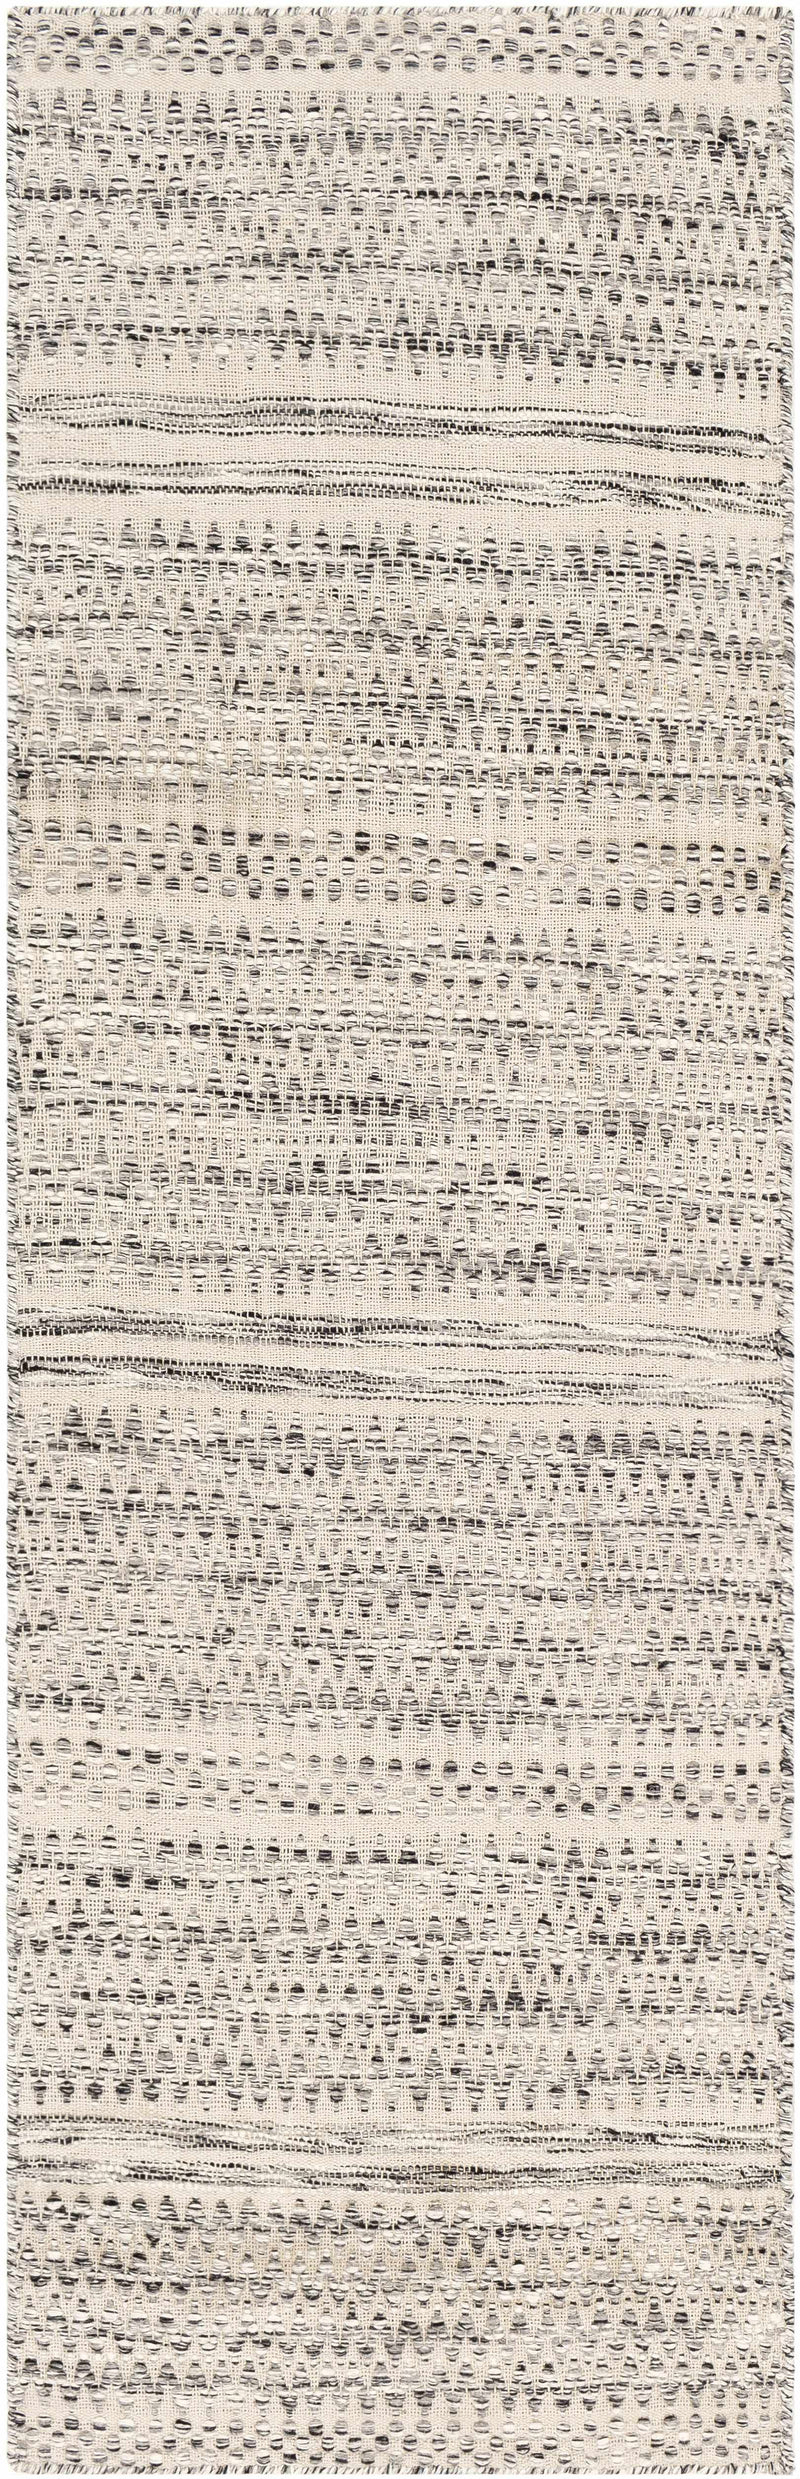 Boutique Rugs - Arabi Wool Area Rug Rugs Boutique Rugs 2'6" x 8' Runner 